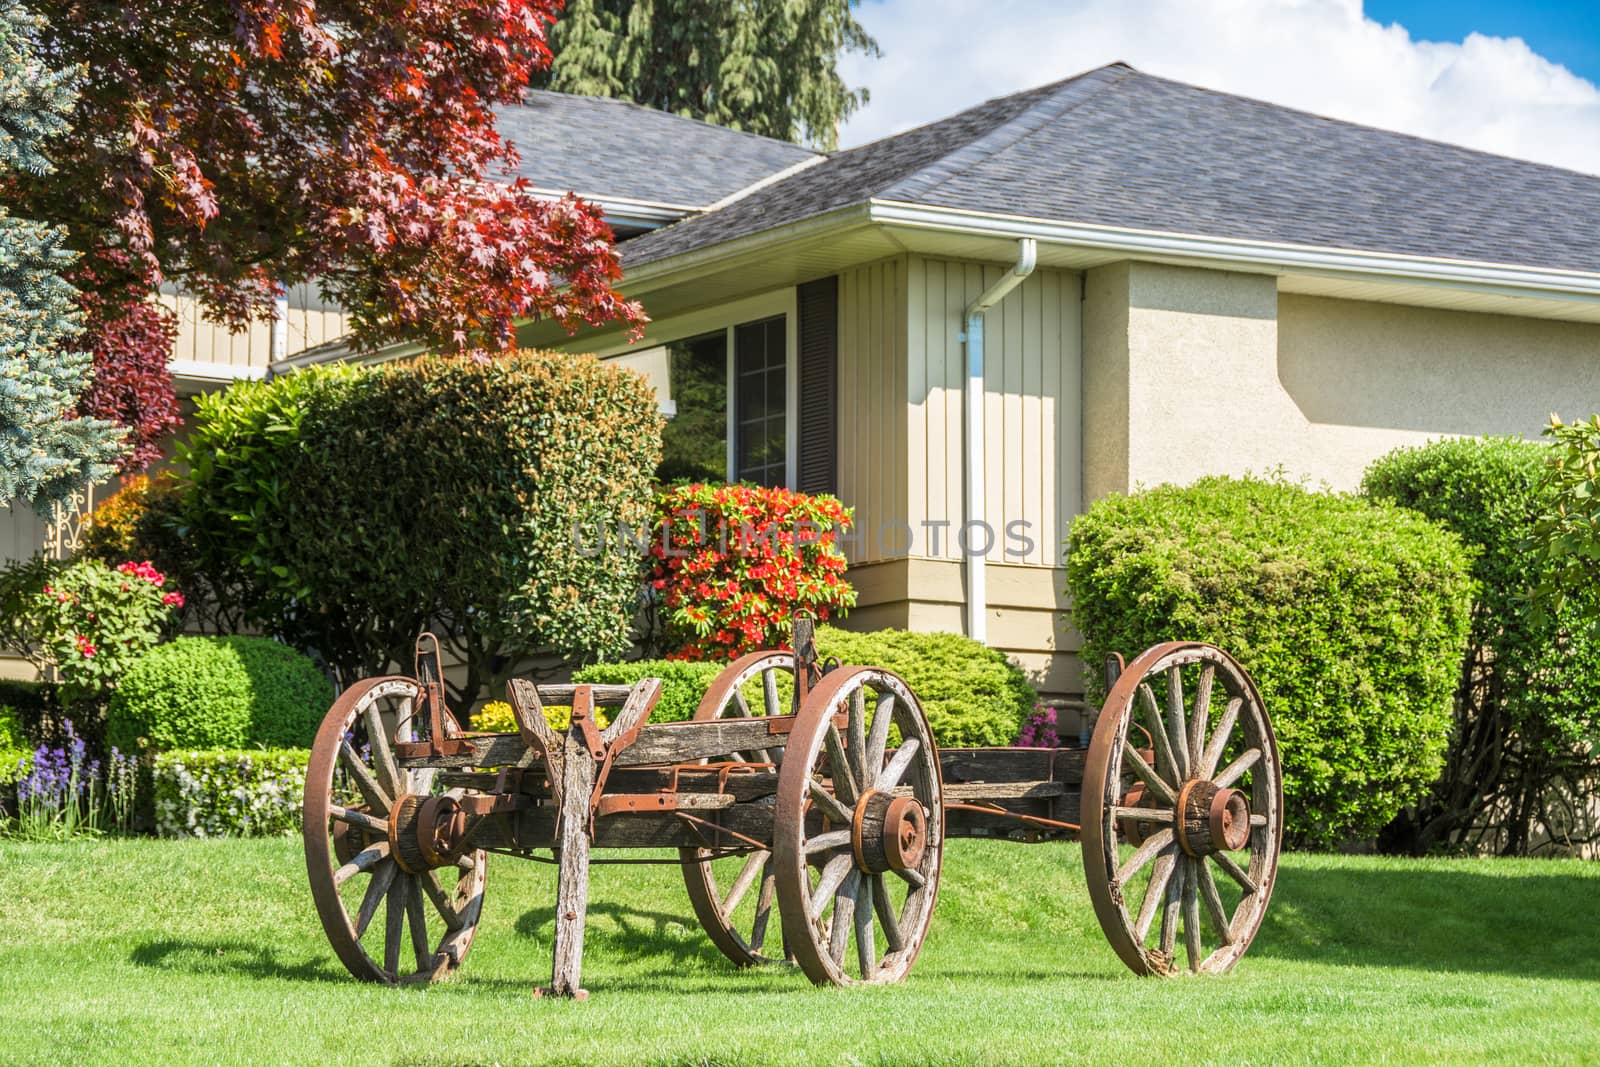 Front yard in residential community creatively landscaped with old horse vehicle by Imagenet